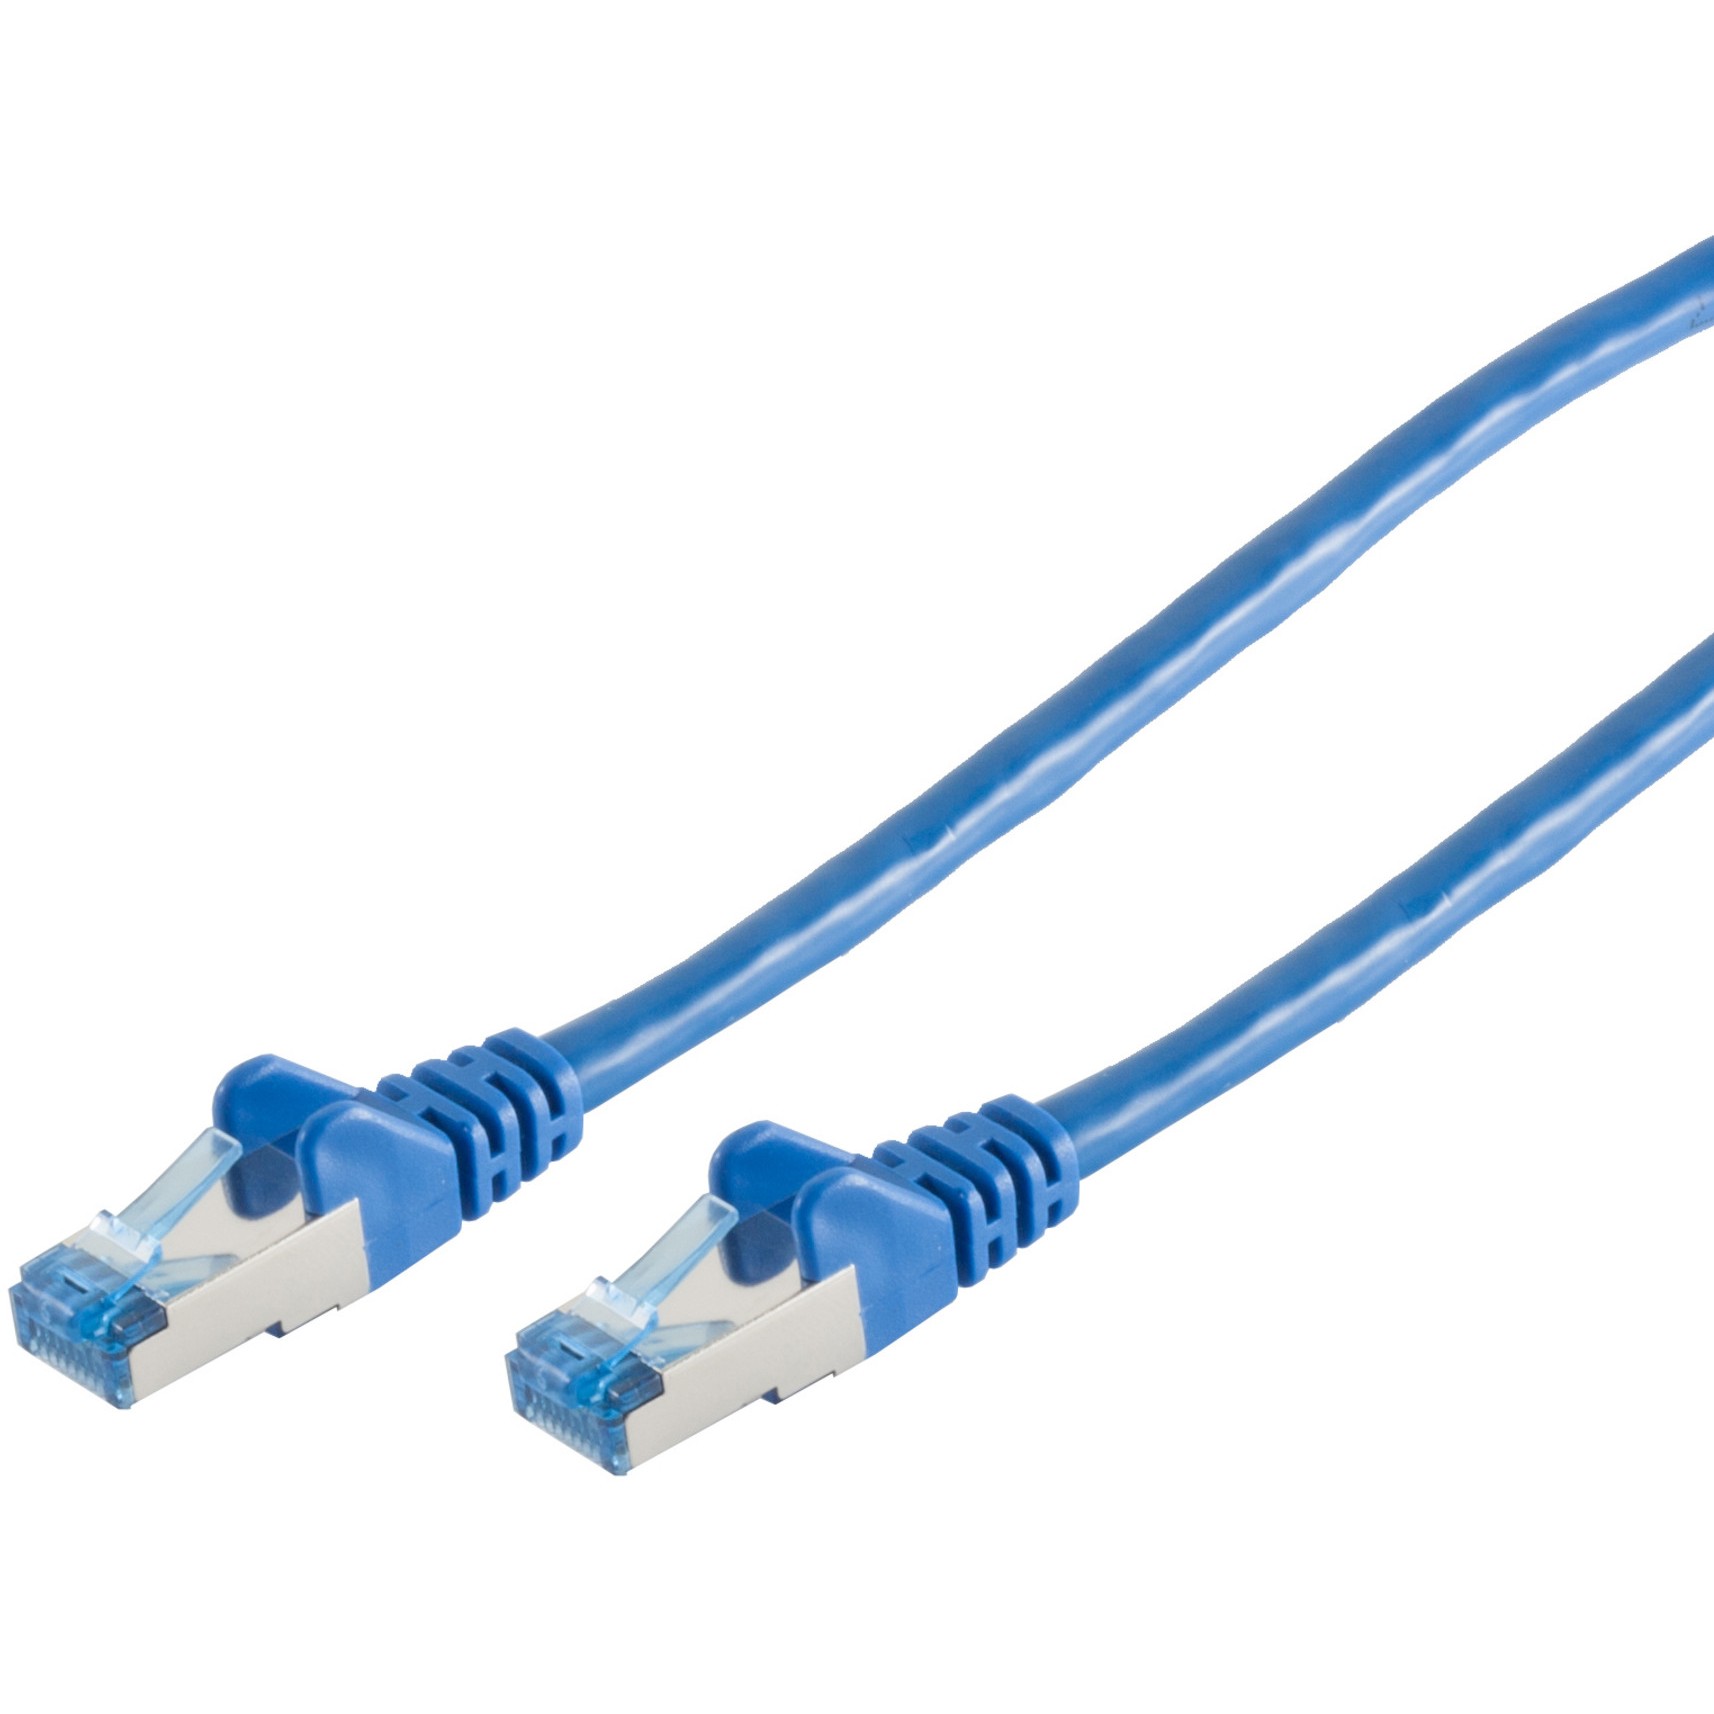 S-Conn 75711-0.25B networking cable